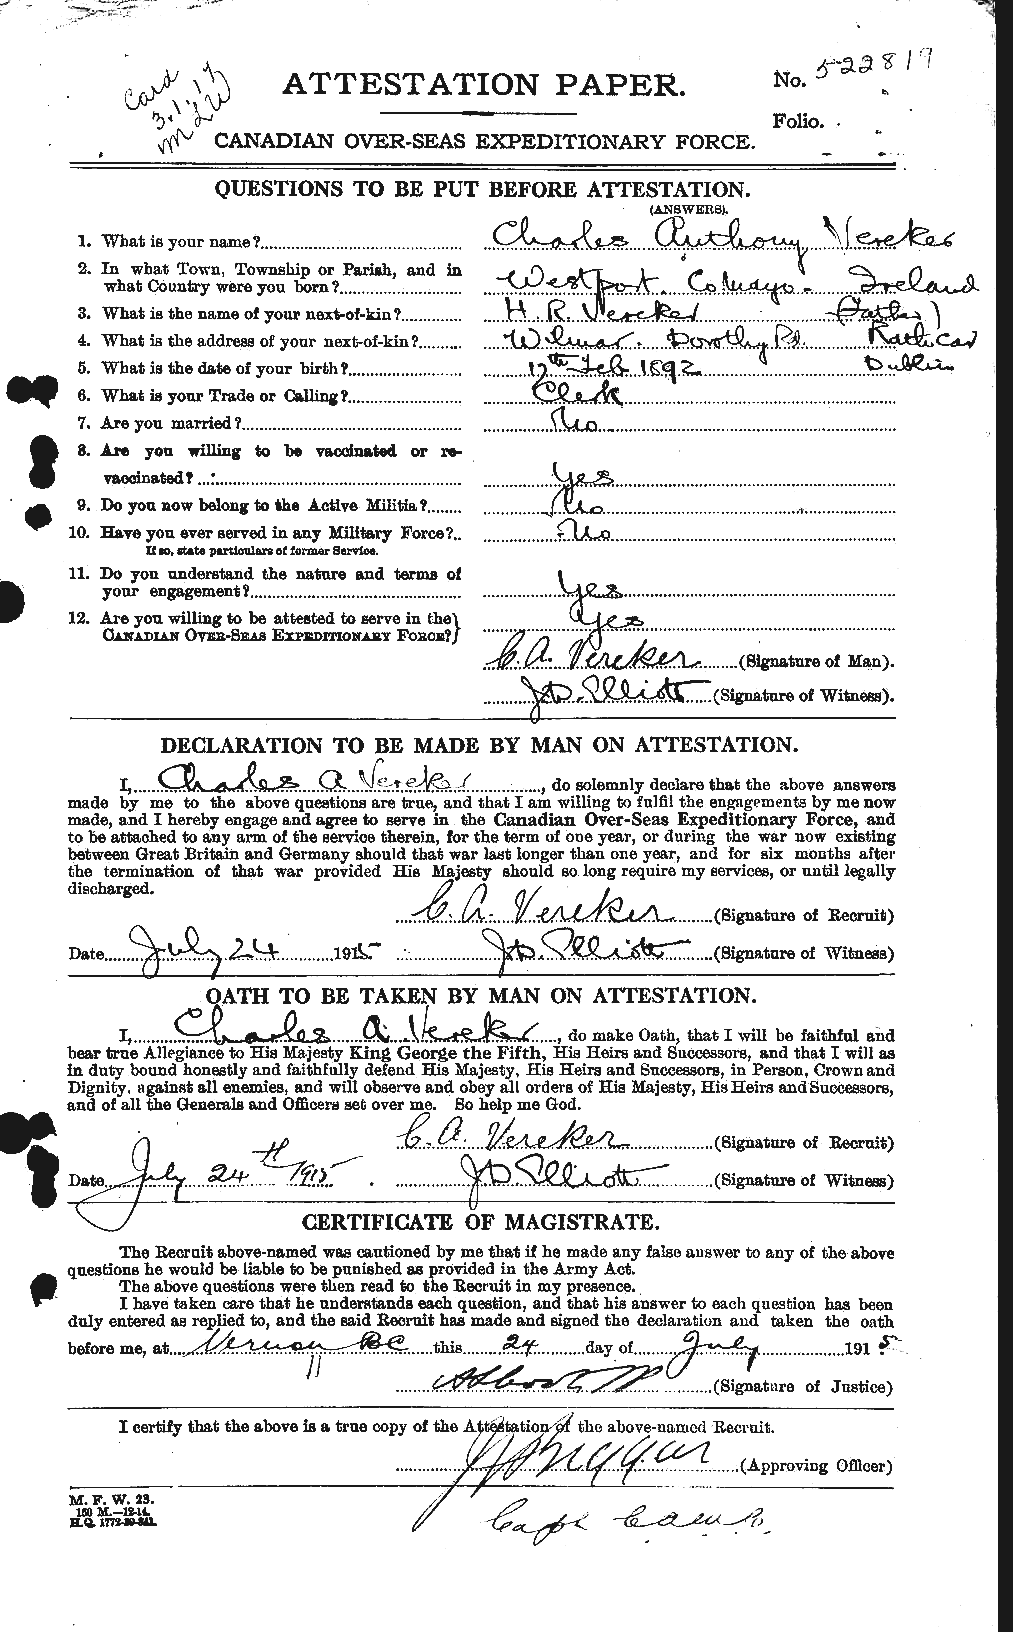 Personnel Records of the First World War - CEF 649443a